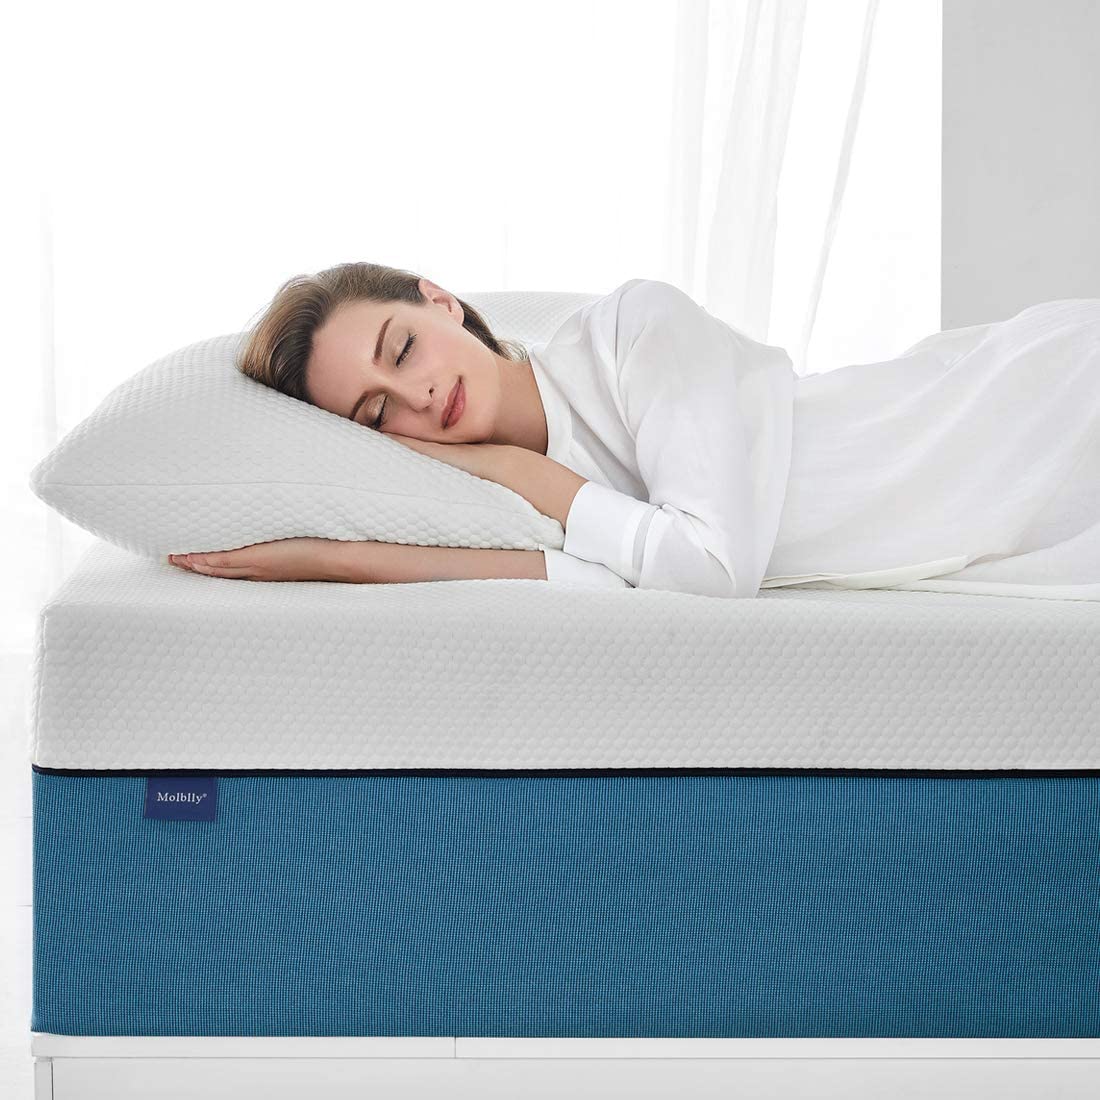 Uncover the Secrets of a Good Night’s Sleep: Choosing the Perfect Mattress